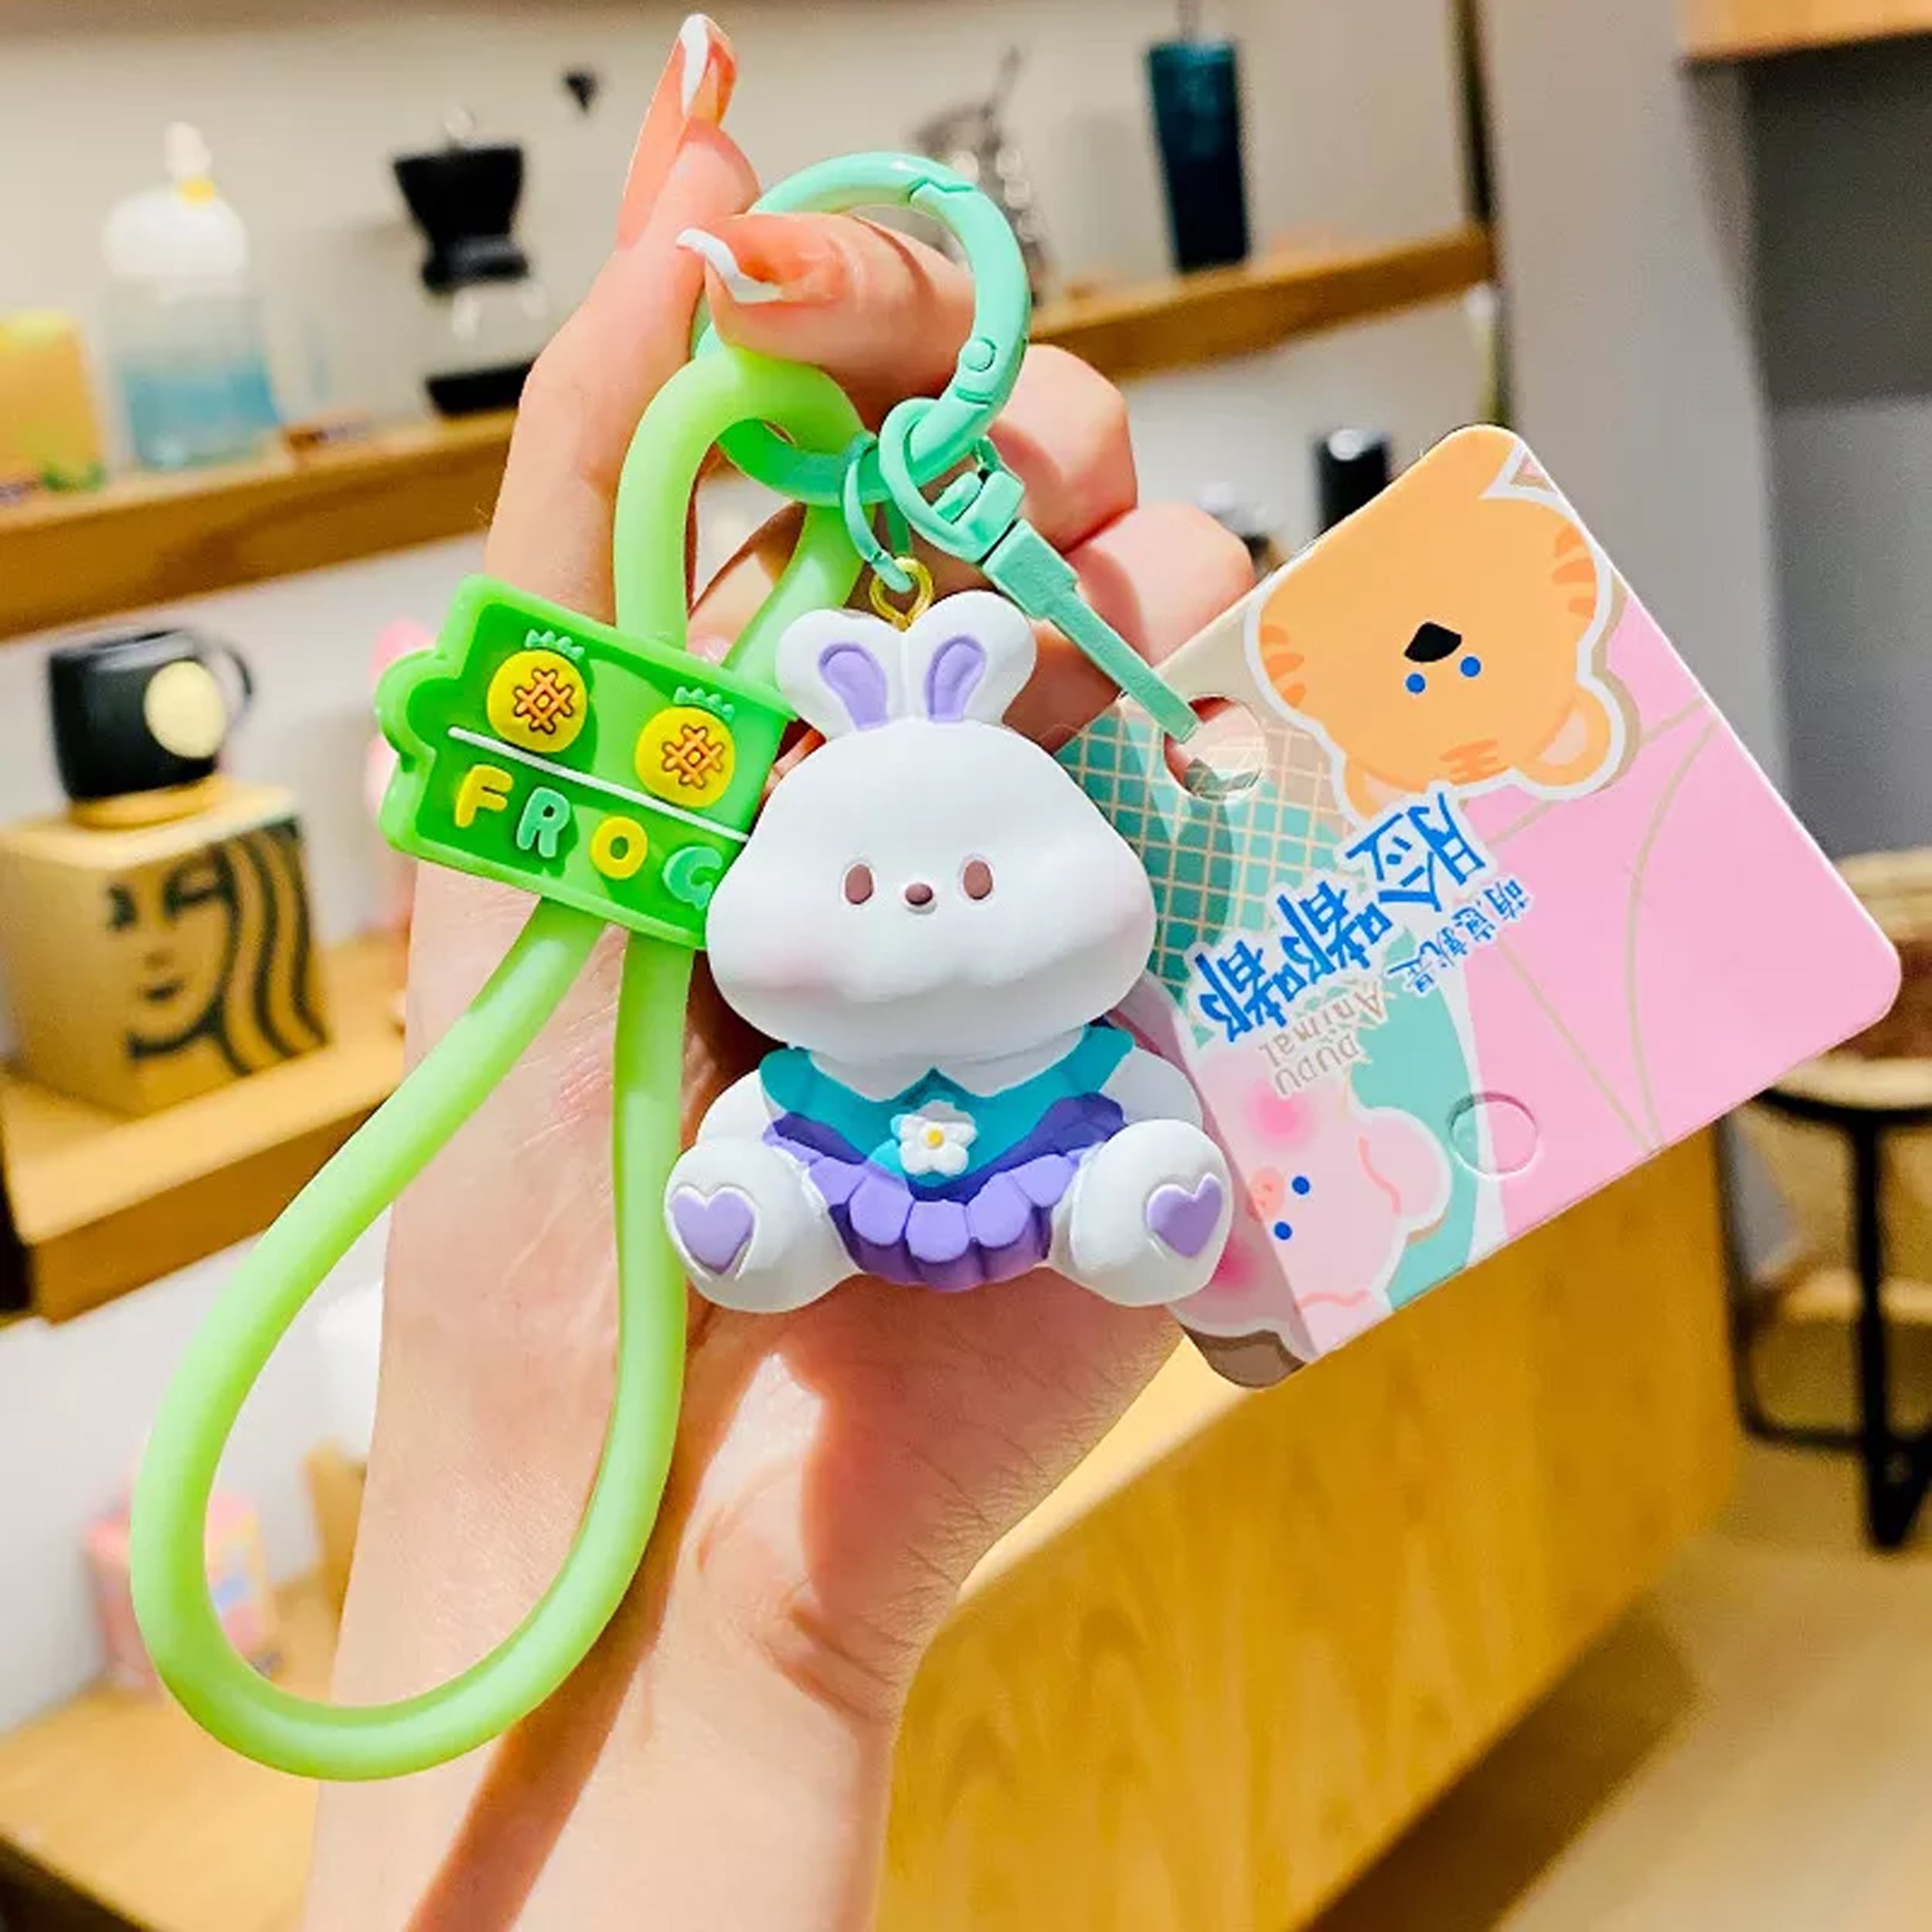 Express Your Style with Cartoon Doodle Shaped Keychains